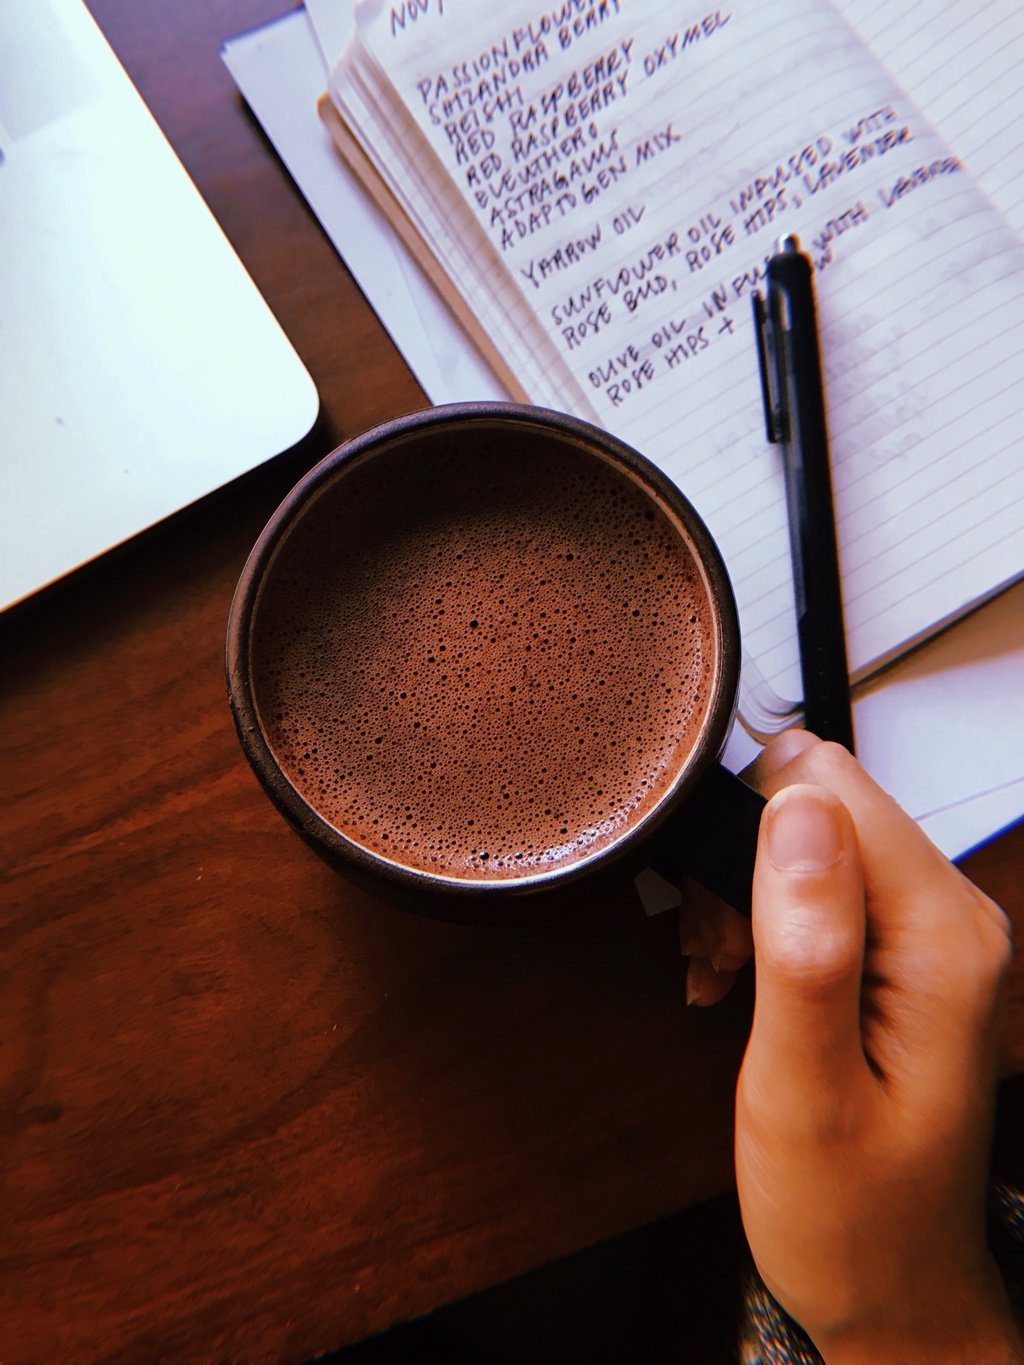 Create Your Daily Cacao Ritual